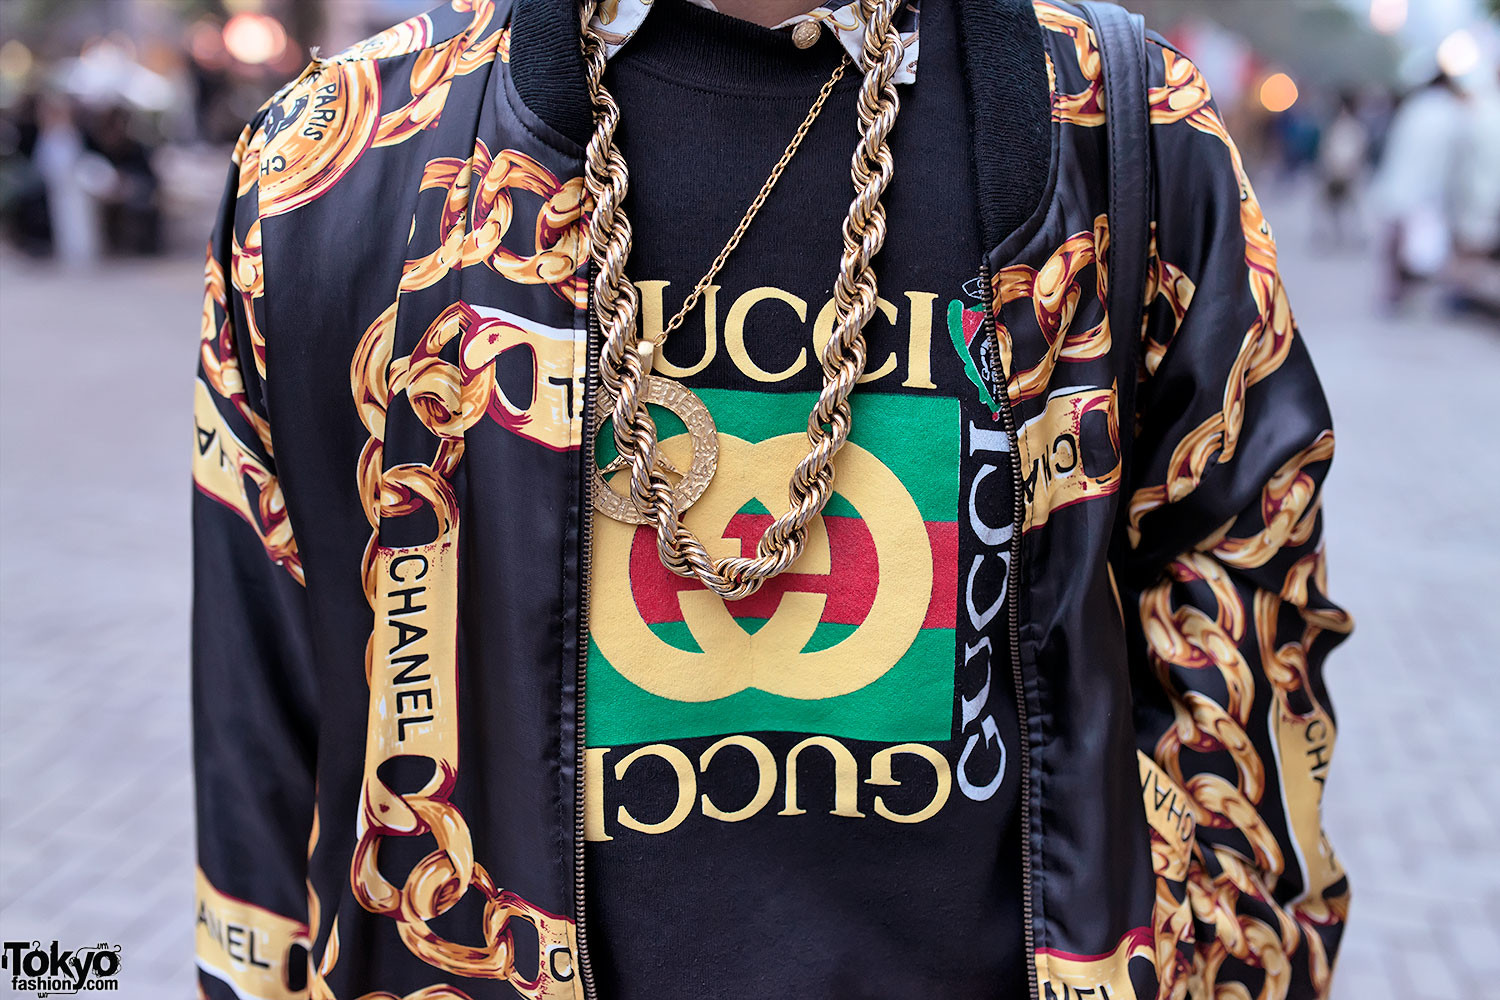 Gucci: The Fastest Growing Brand in 2019